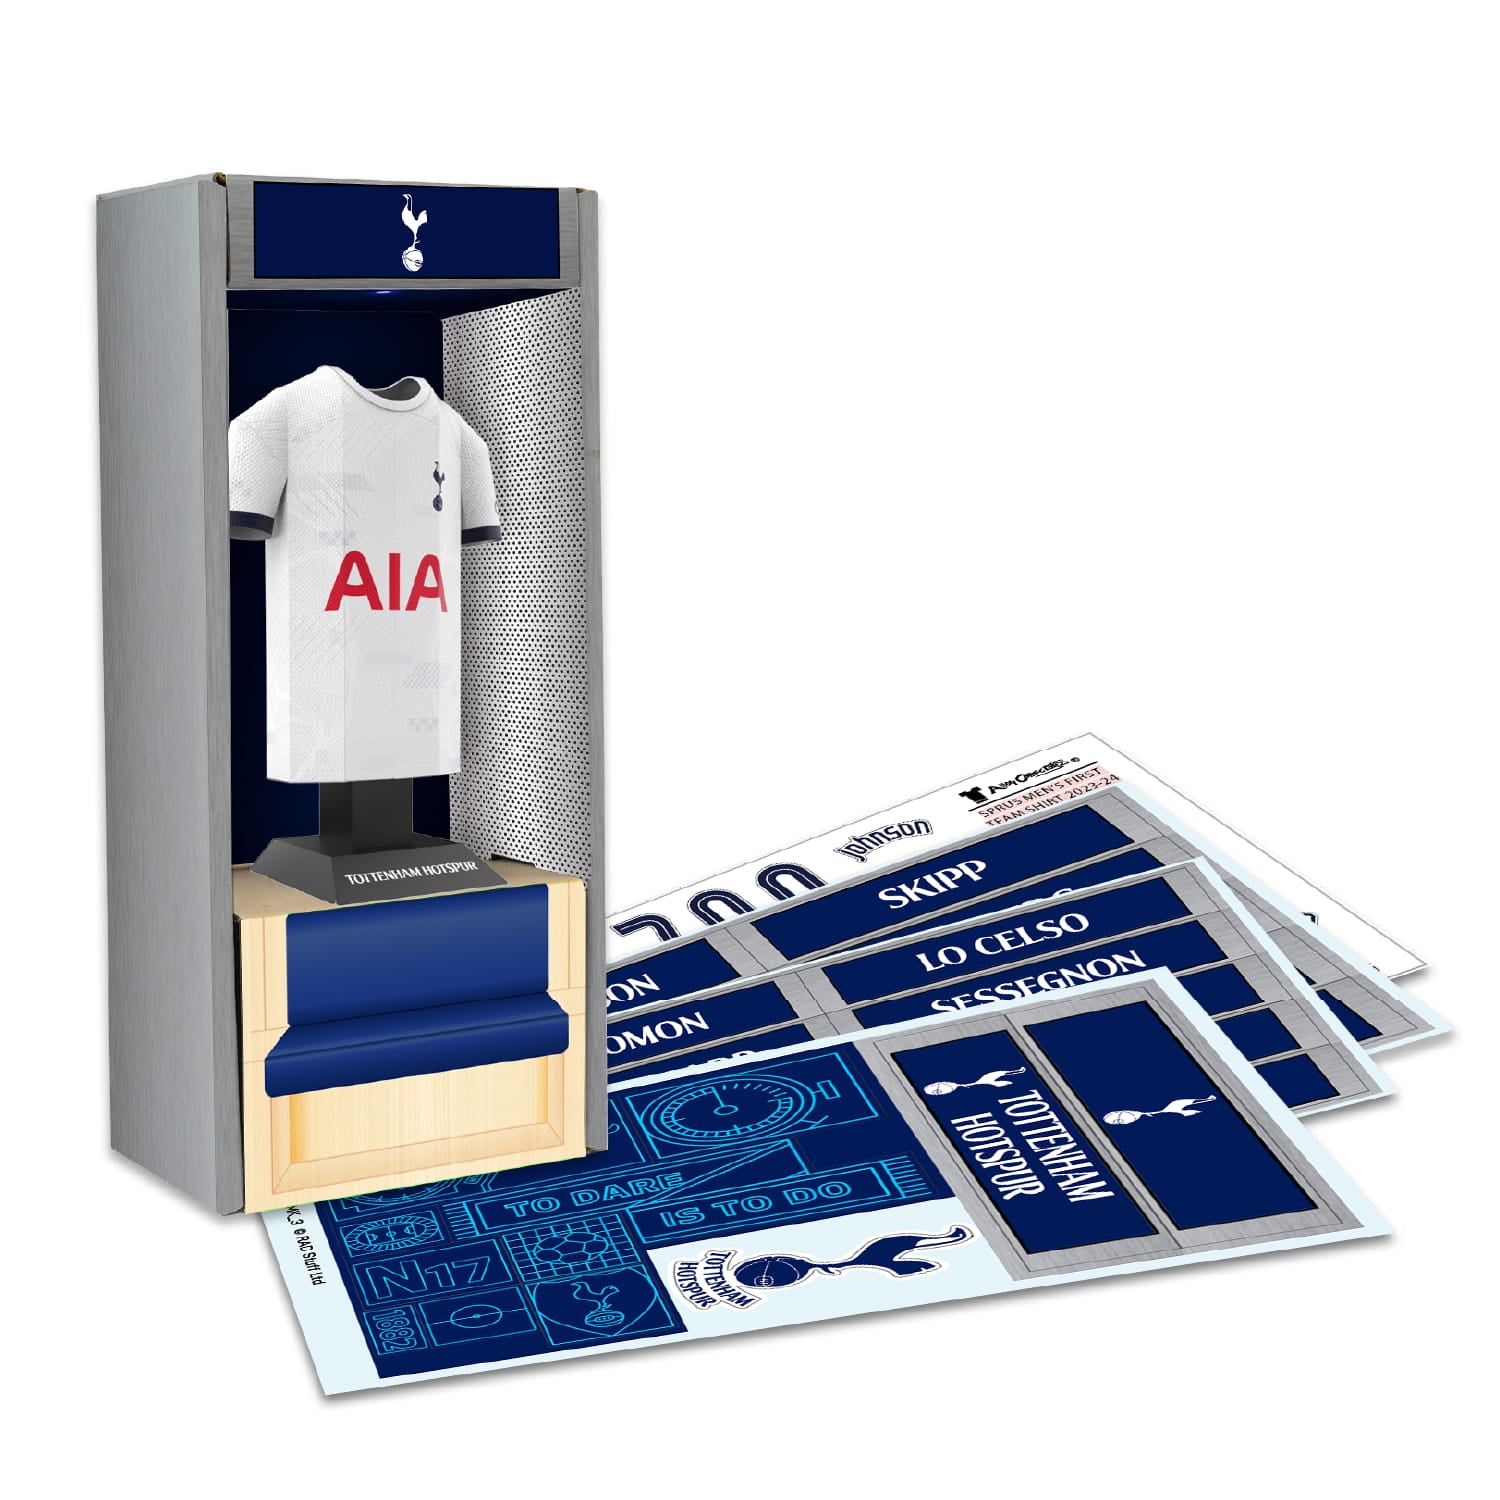 Tottenham home kit in locker display with stickers